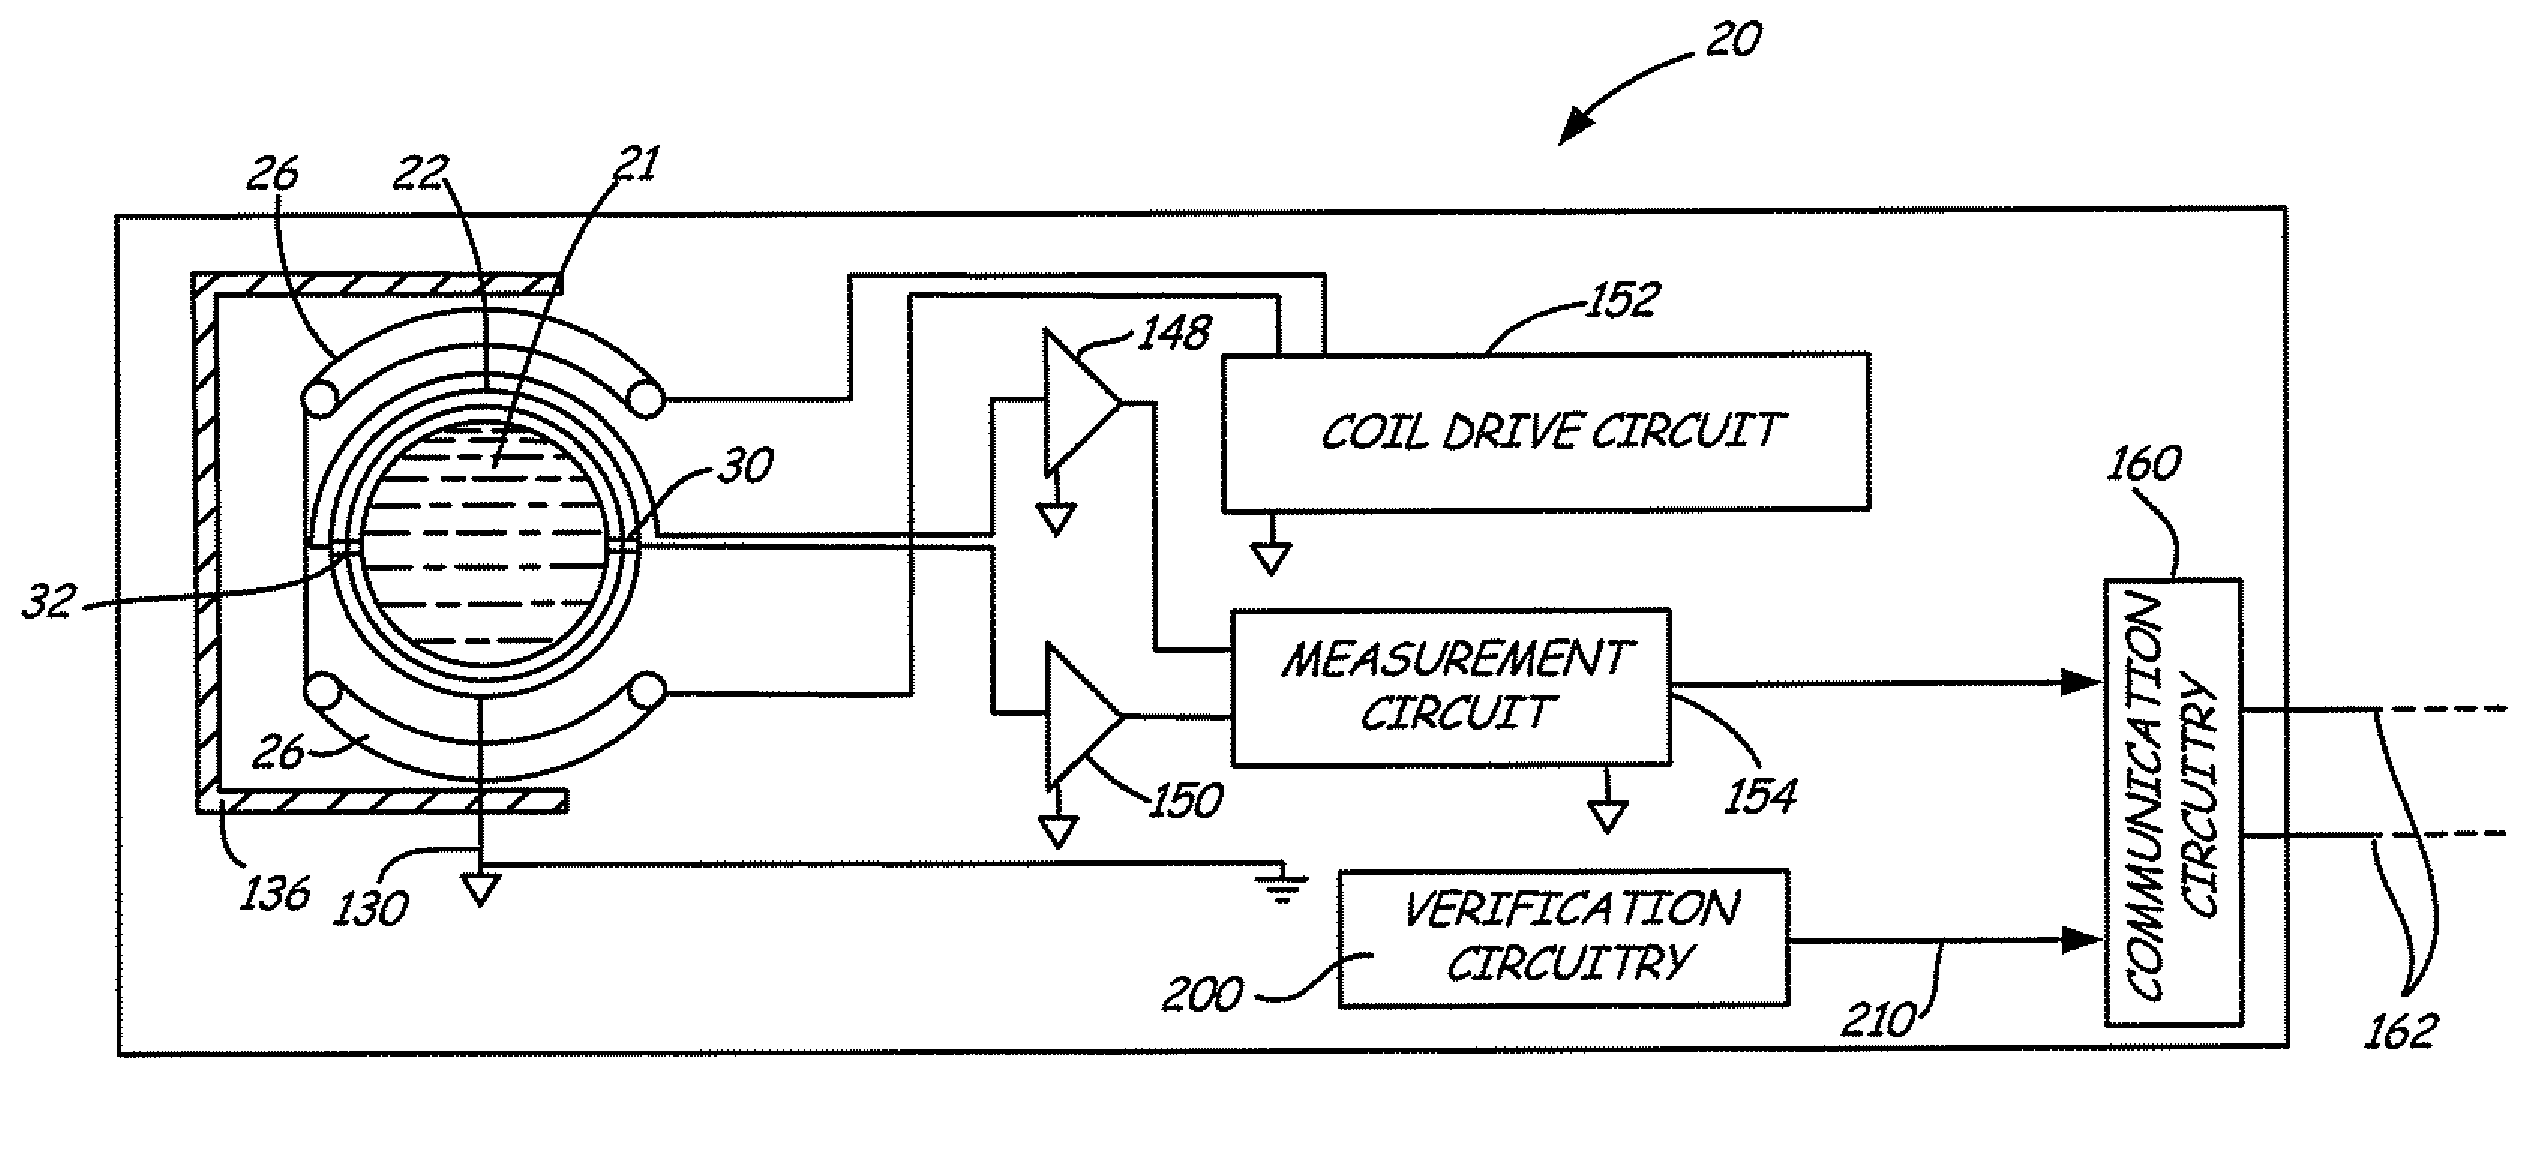 Magnetic flowmeter with verification